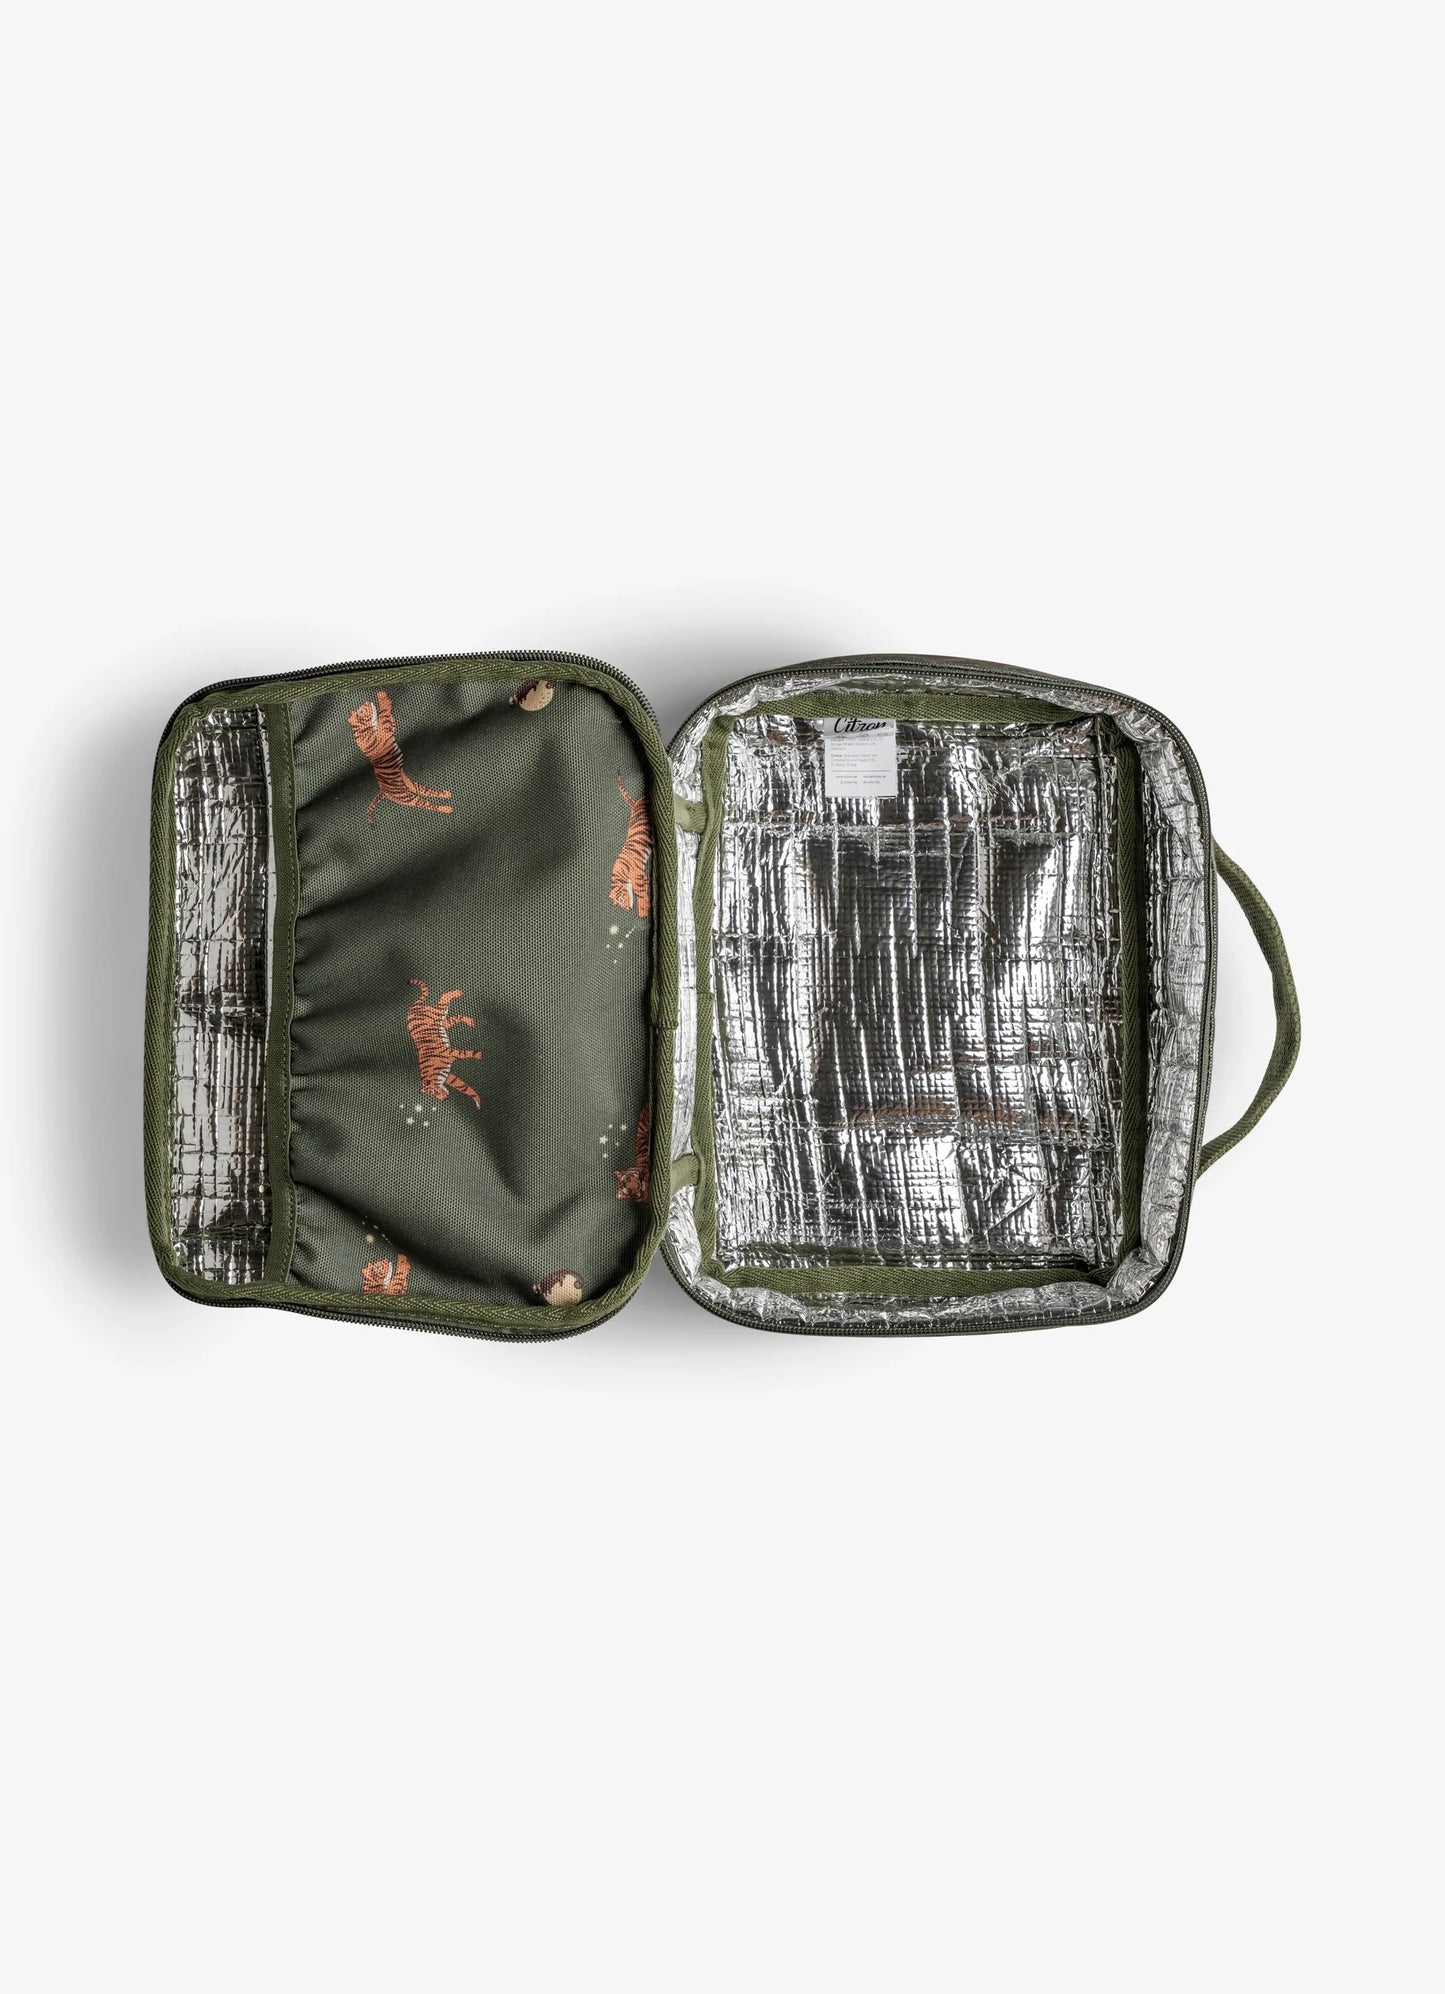 Thermal Classic Lunch Bag Tiger